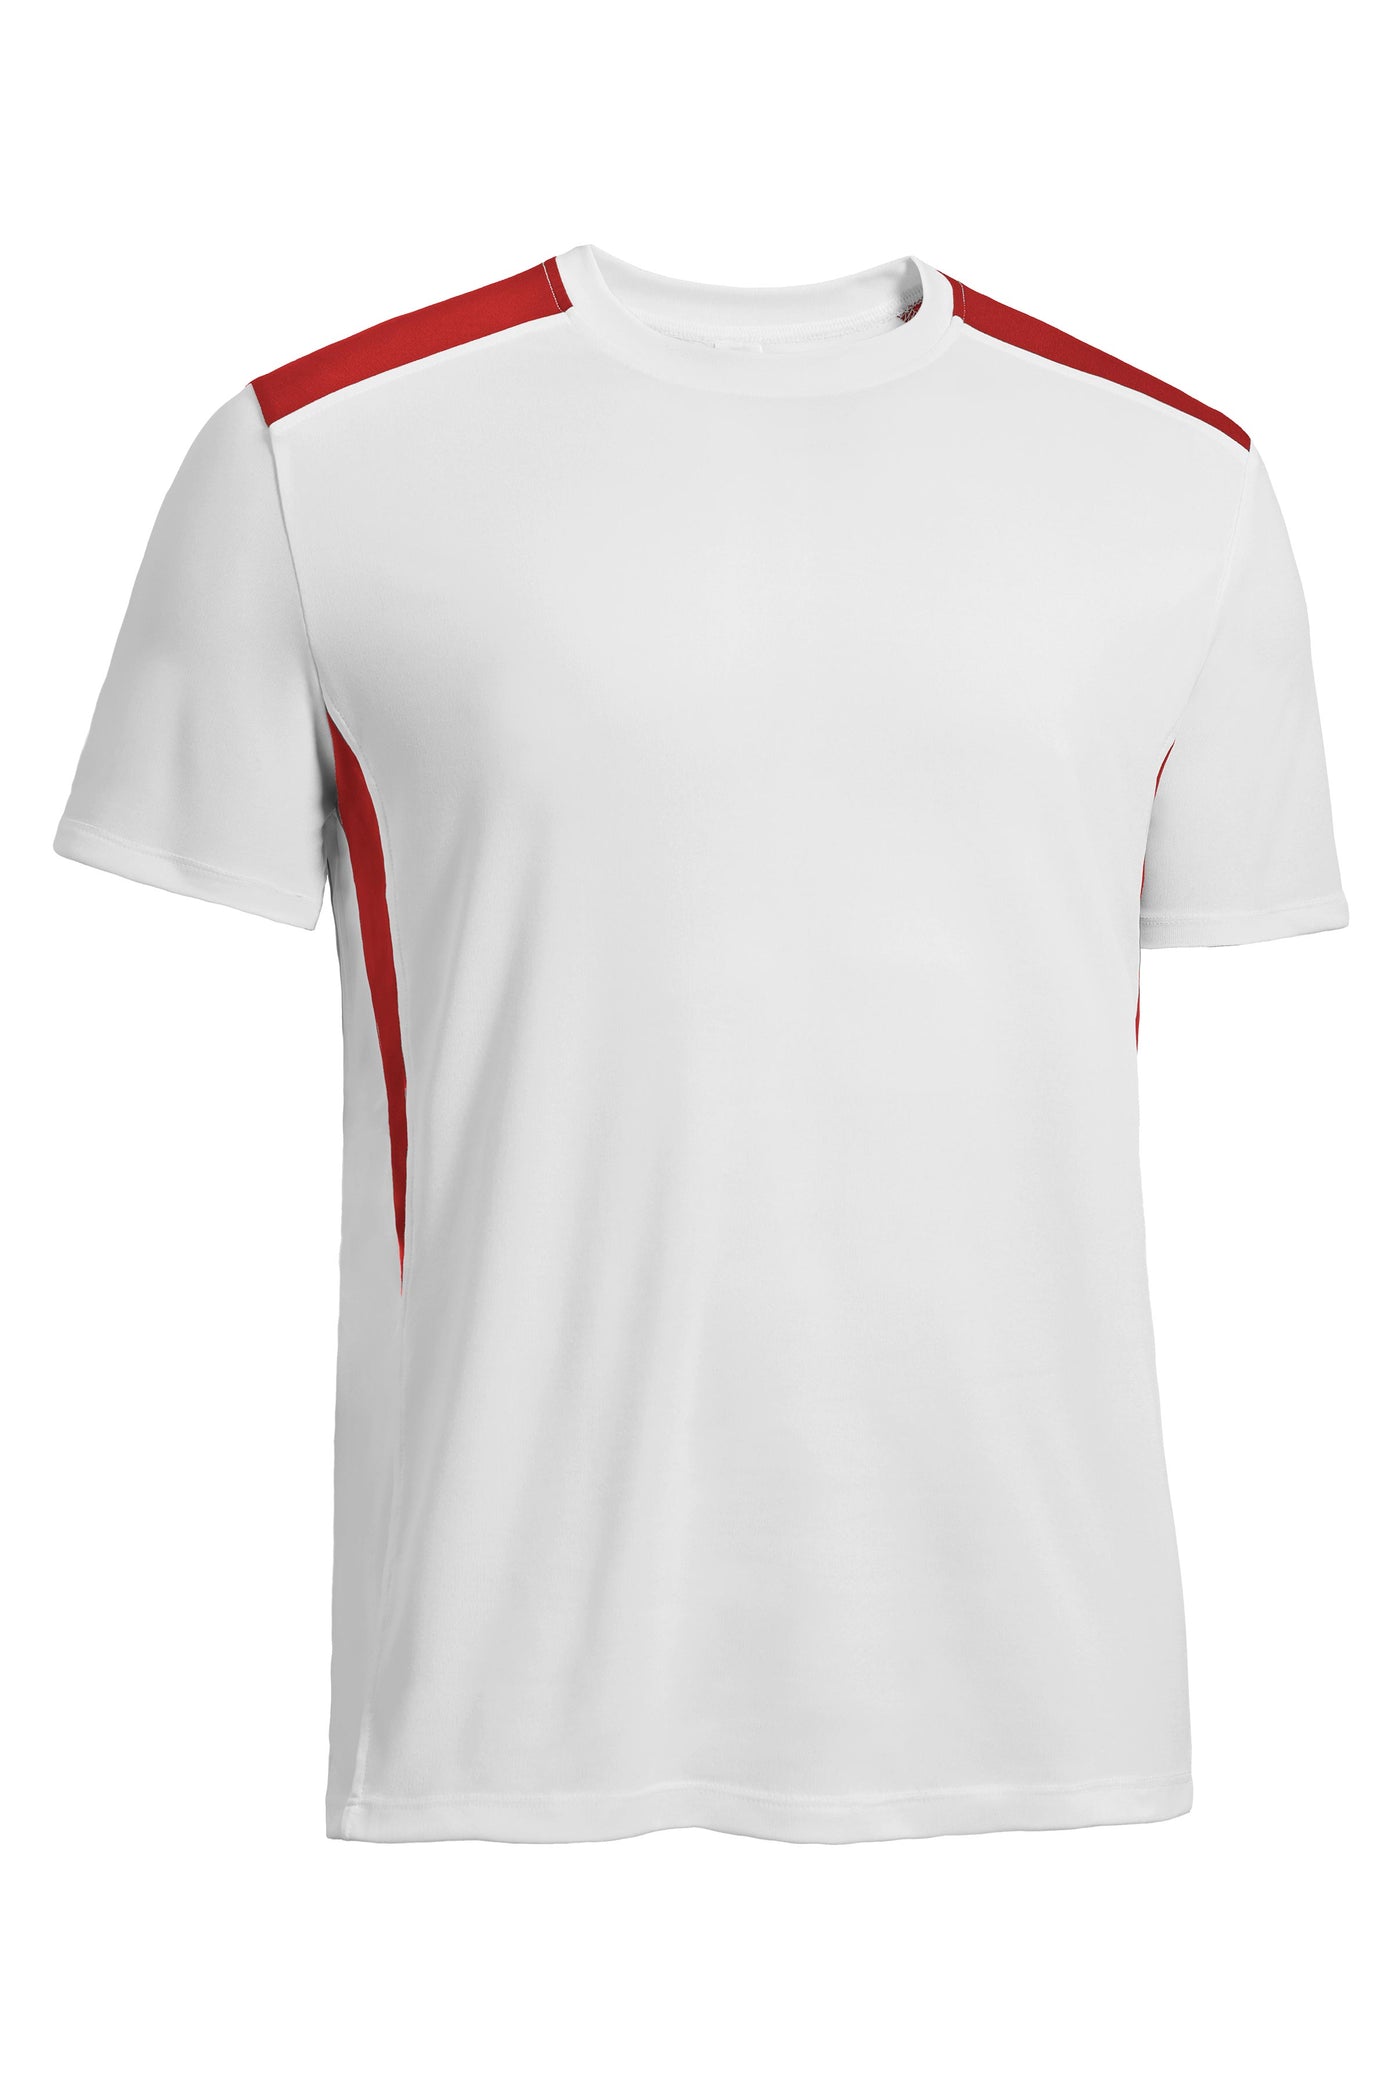 Expert Apparel Made in USA Men's Pk Max Colorblock Fitness Gym Sport Tee#color_white-red